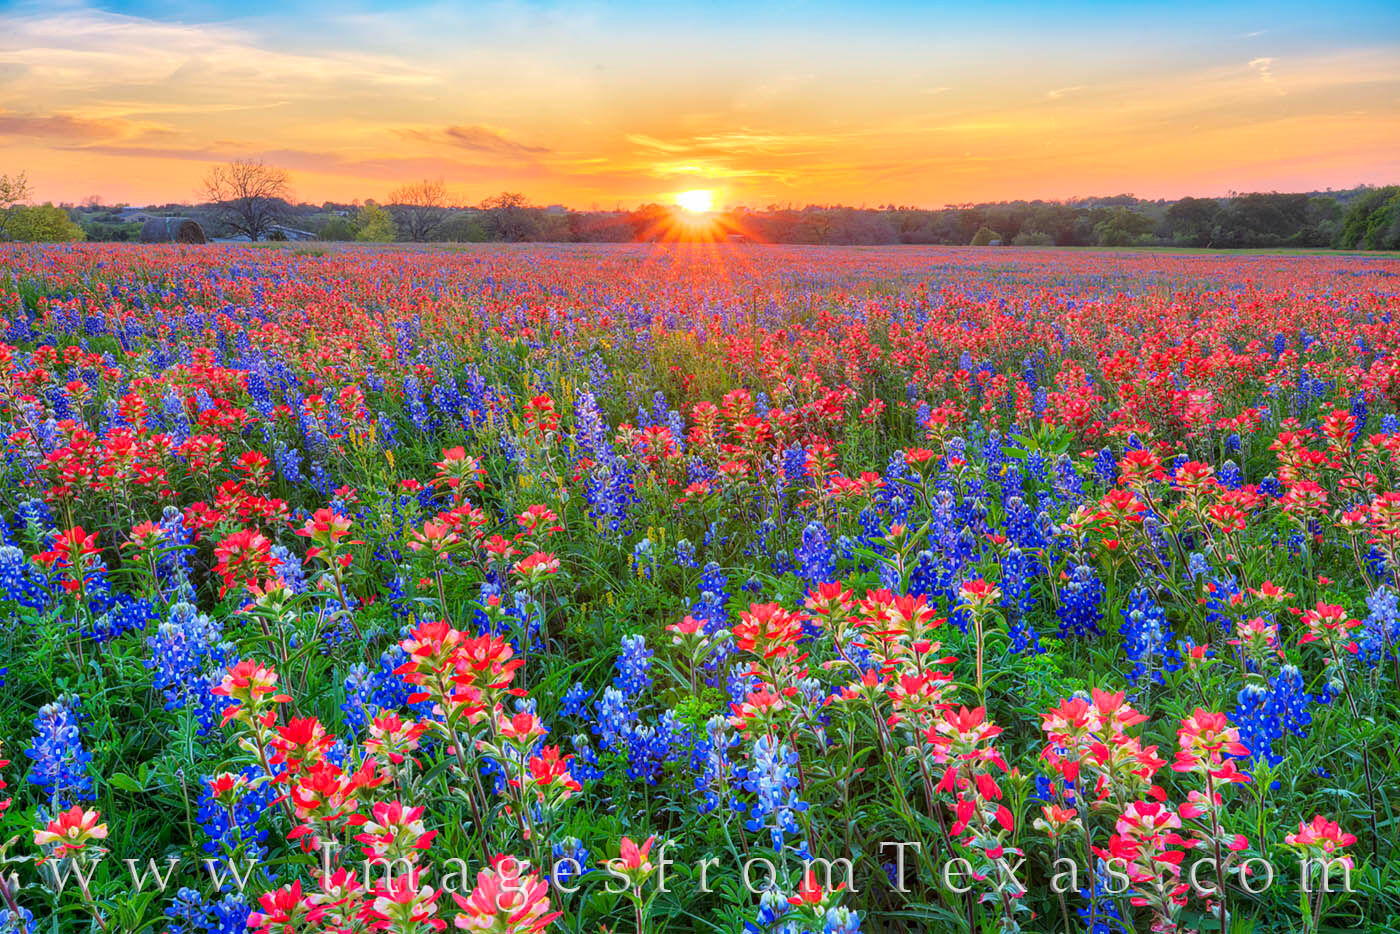 After driving for hours, I settled for this location for sunset on a cool Spring March evening. The bluebonnets and Indian blankets...